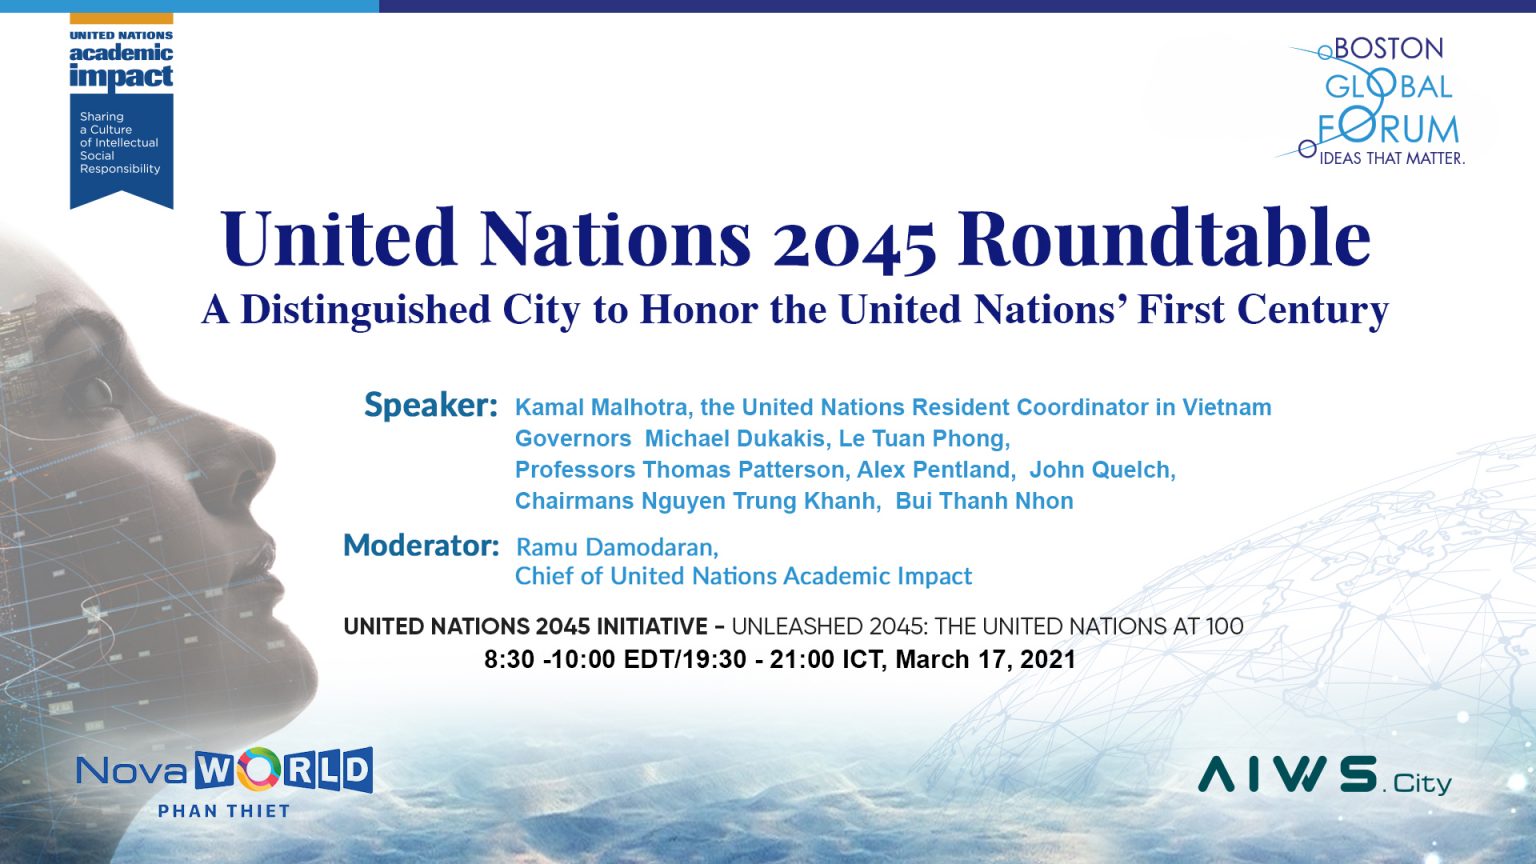 The United Nations 2045 Roundtable: A Distinguished City to Honor the United Nations’ First Century